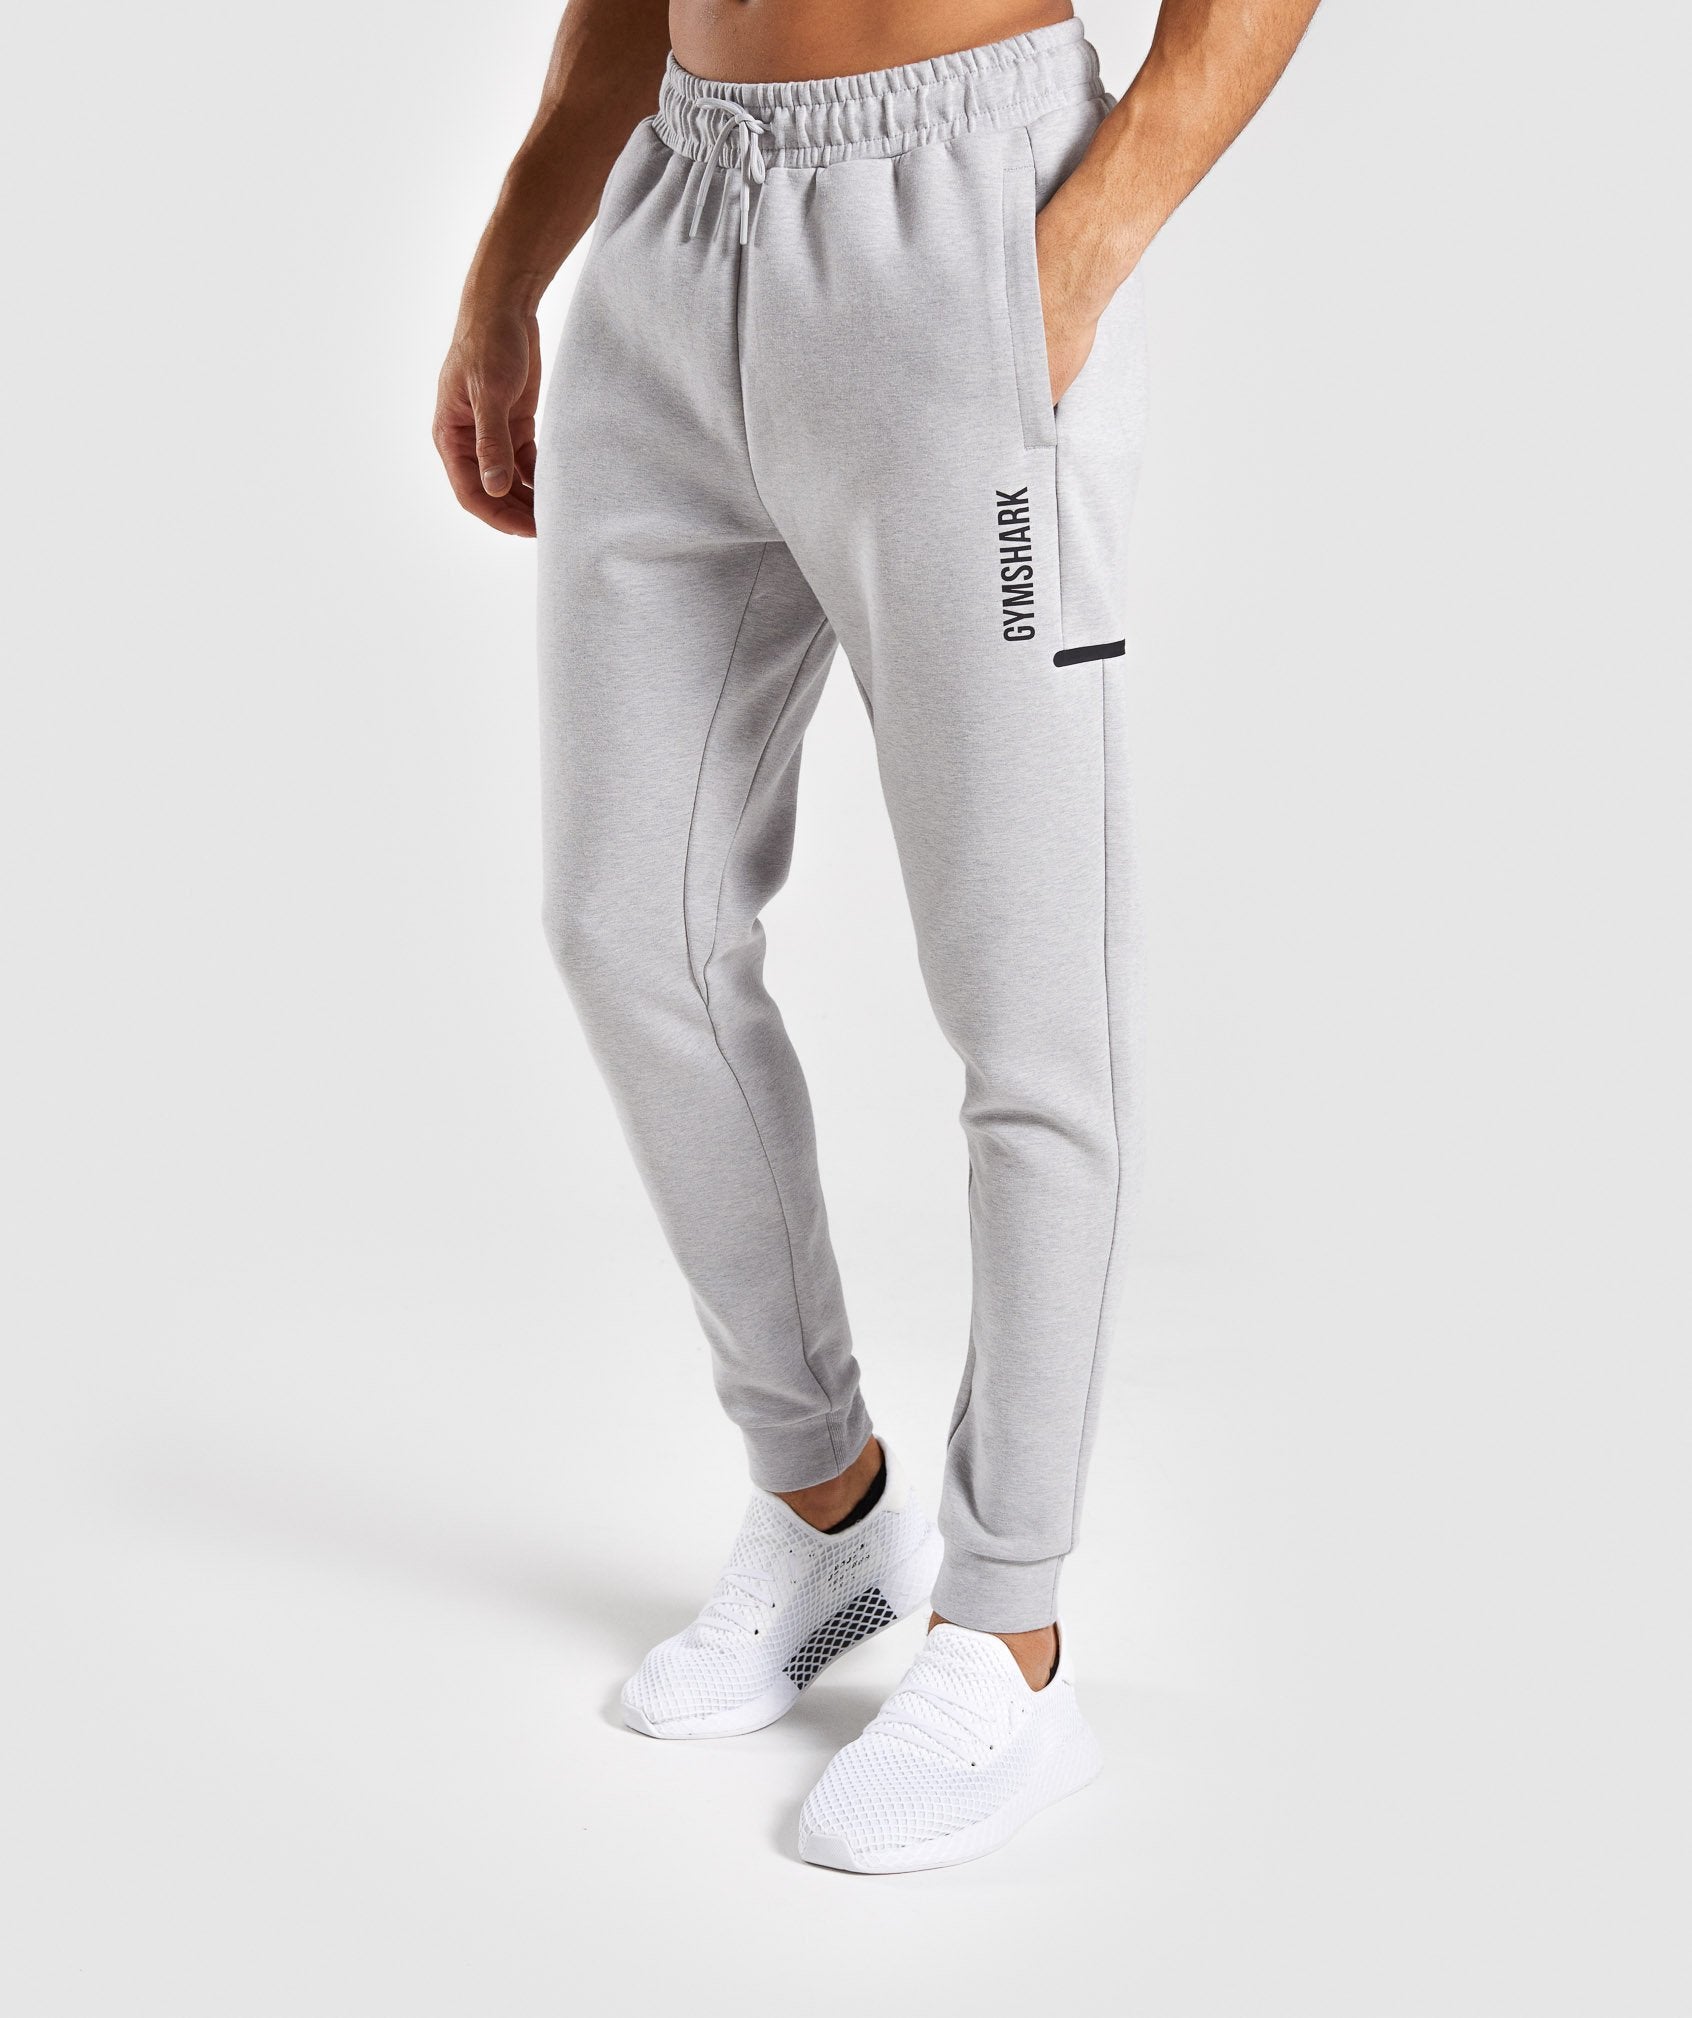 Ultra Joggers in Light Grey Marl - view 1